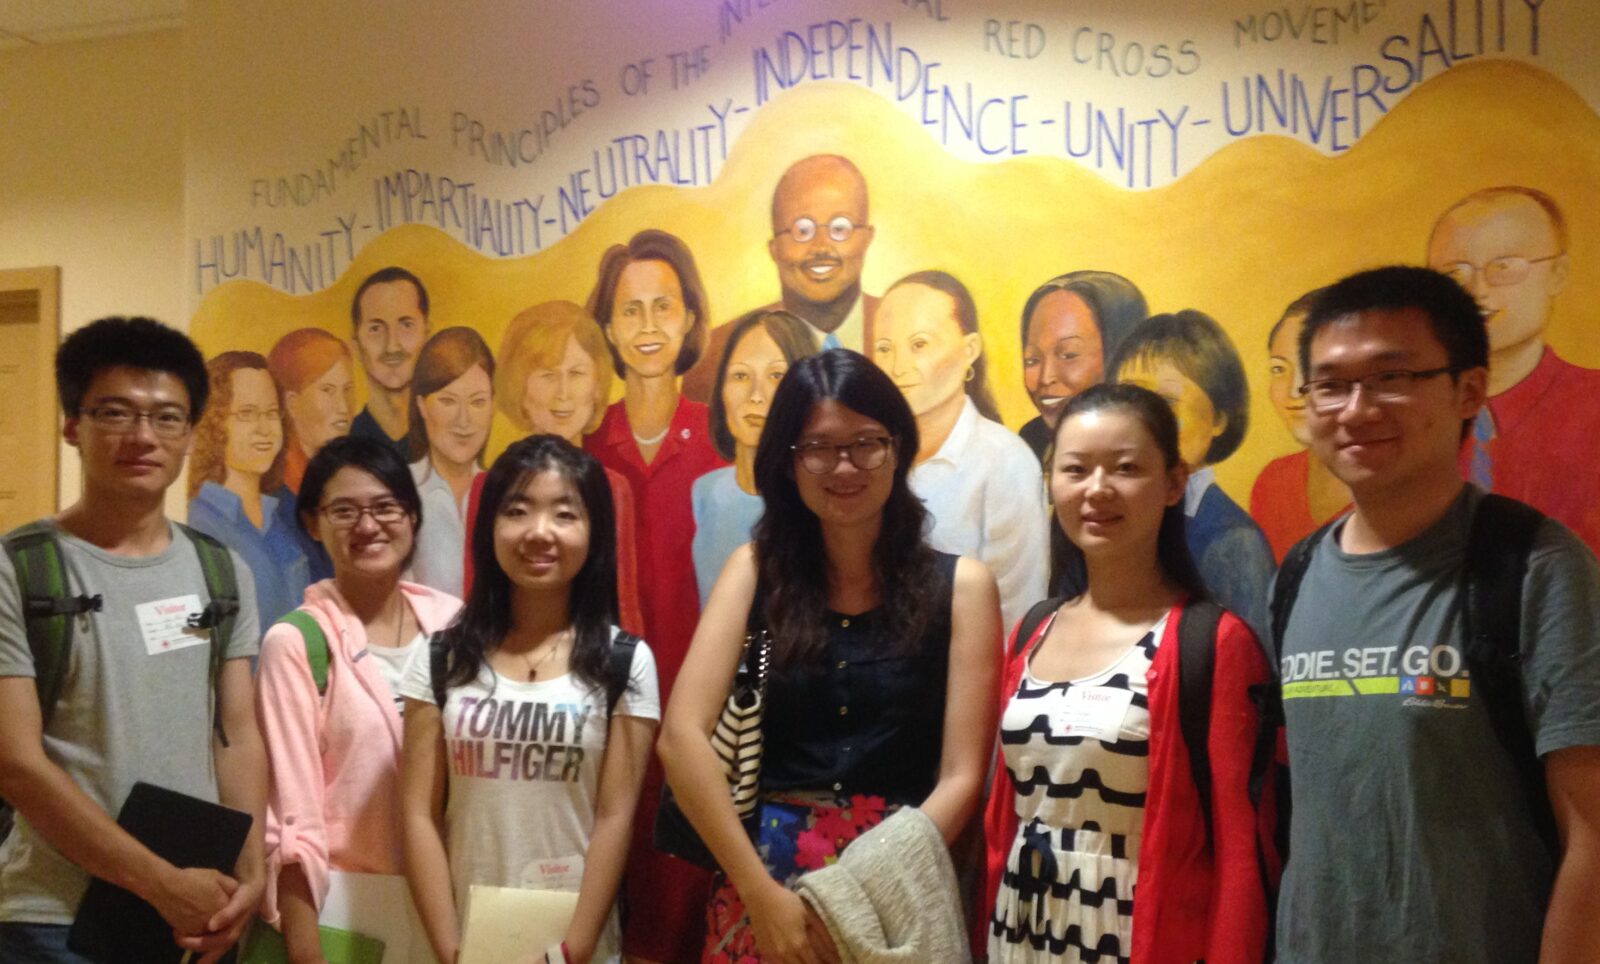 Bejing Normal University exchange students gather at the American Red Cross in front of a mural.